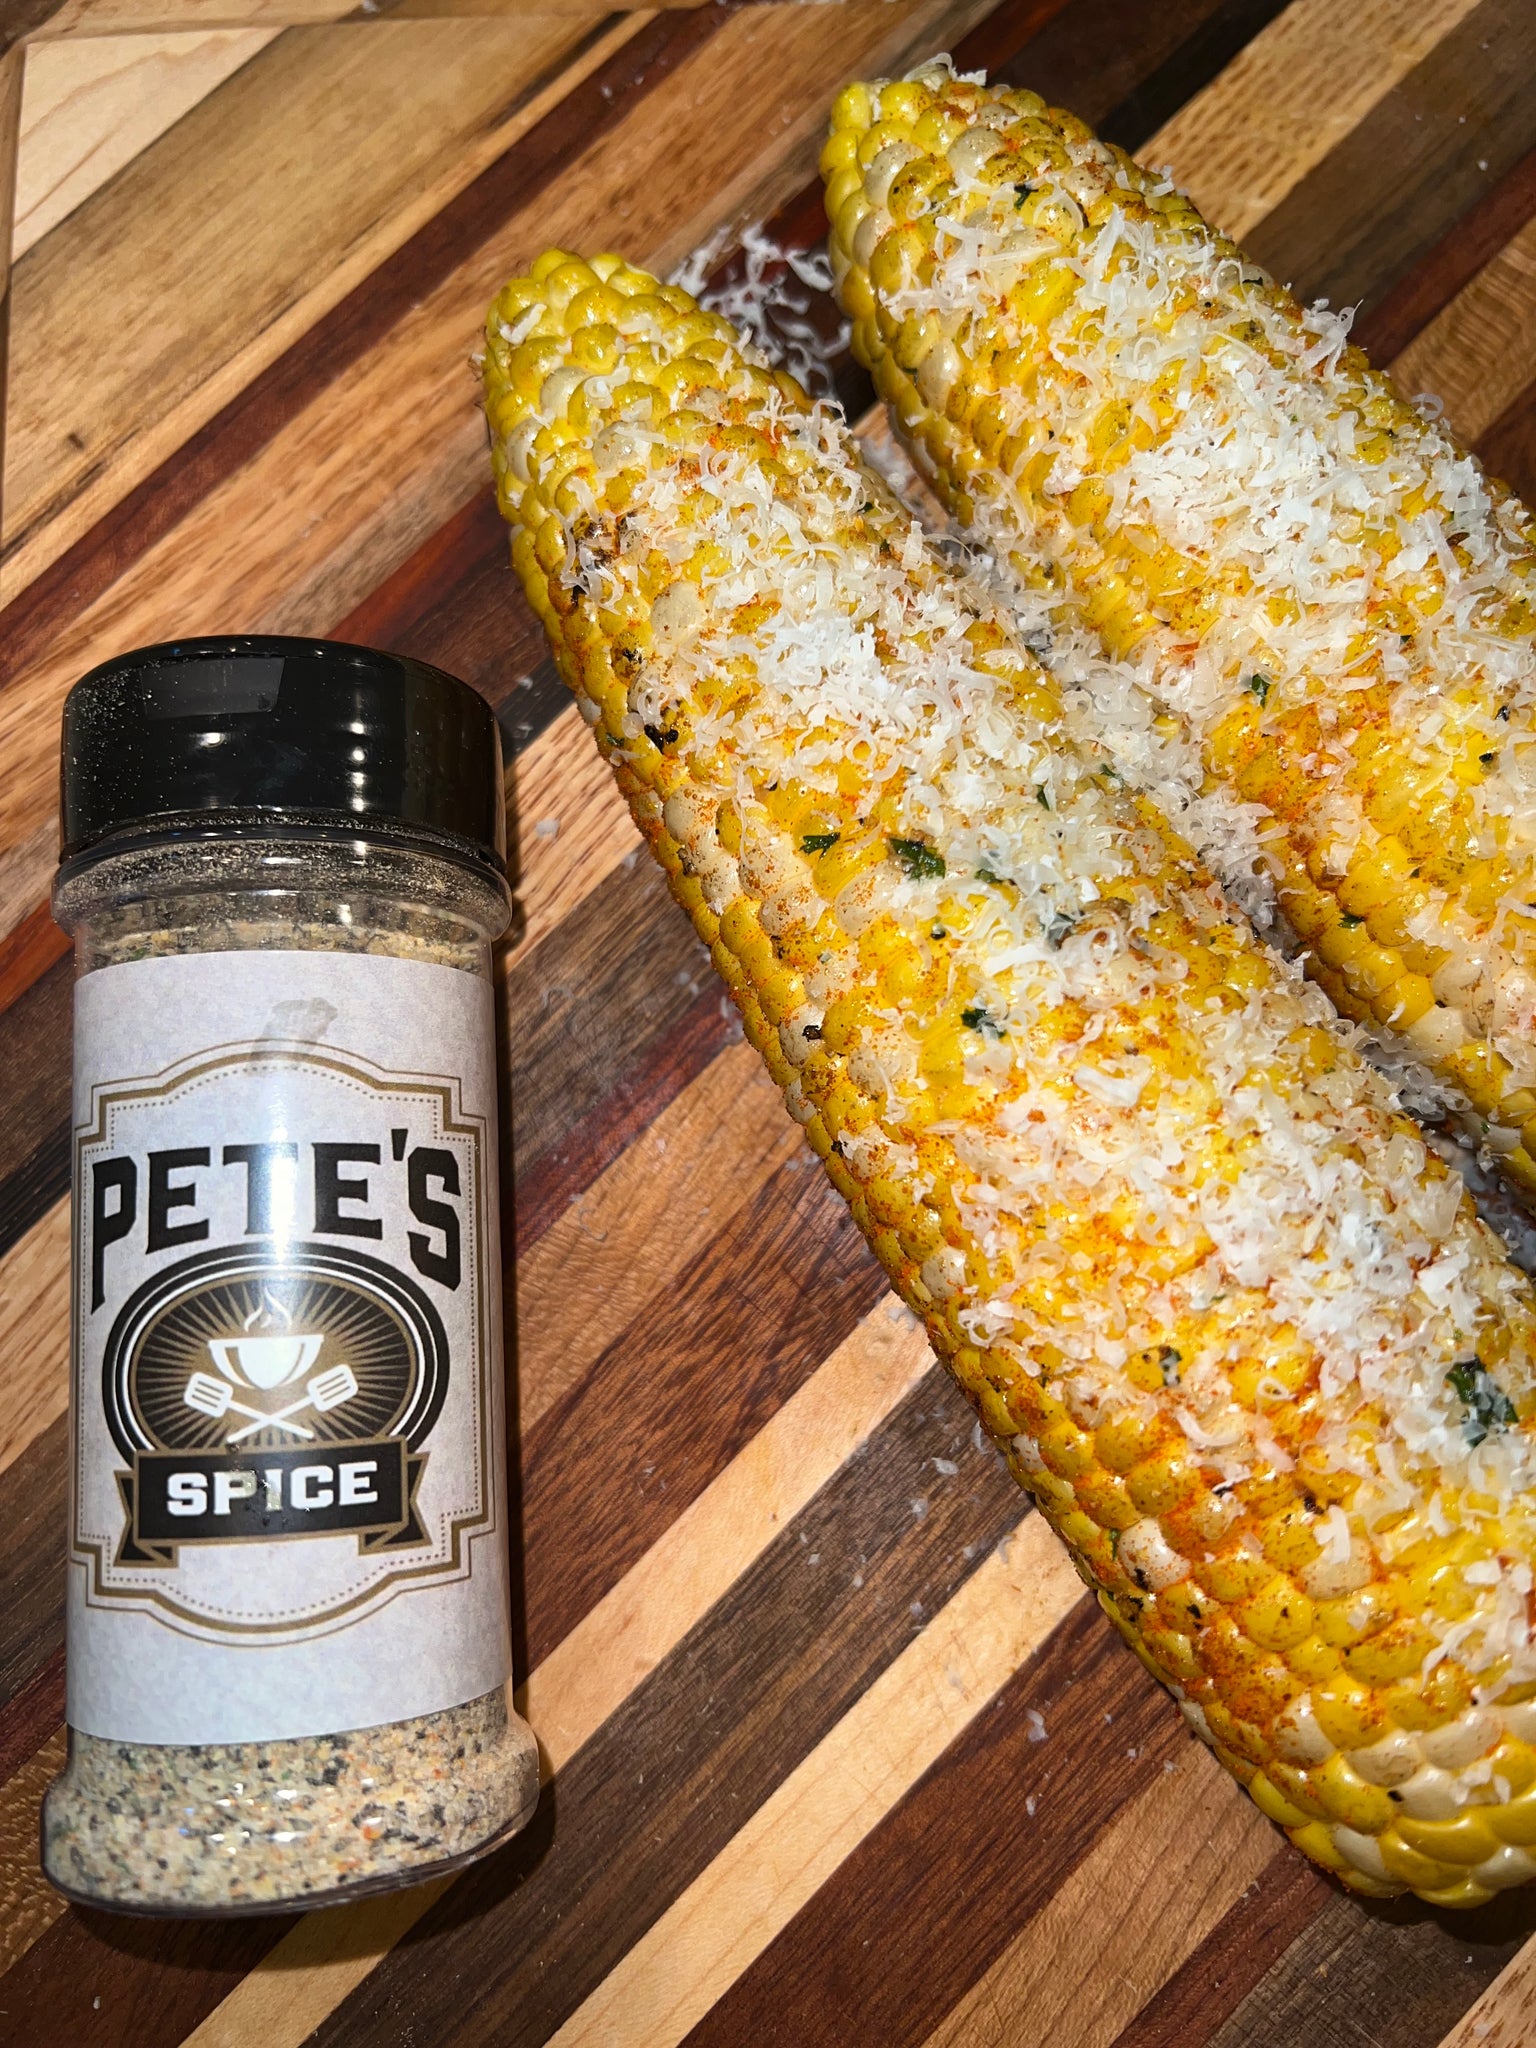 Pete's Spice Grilled Corn!